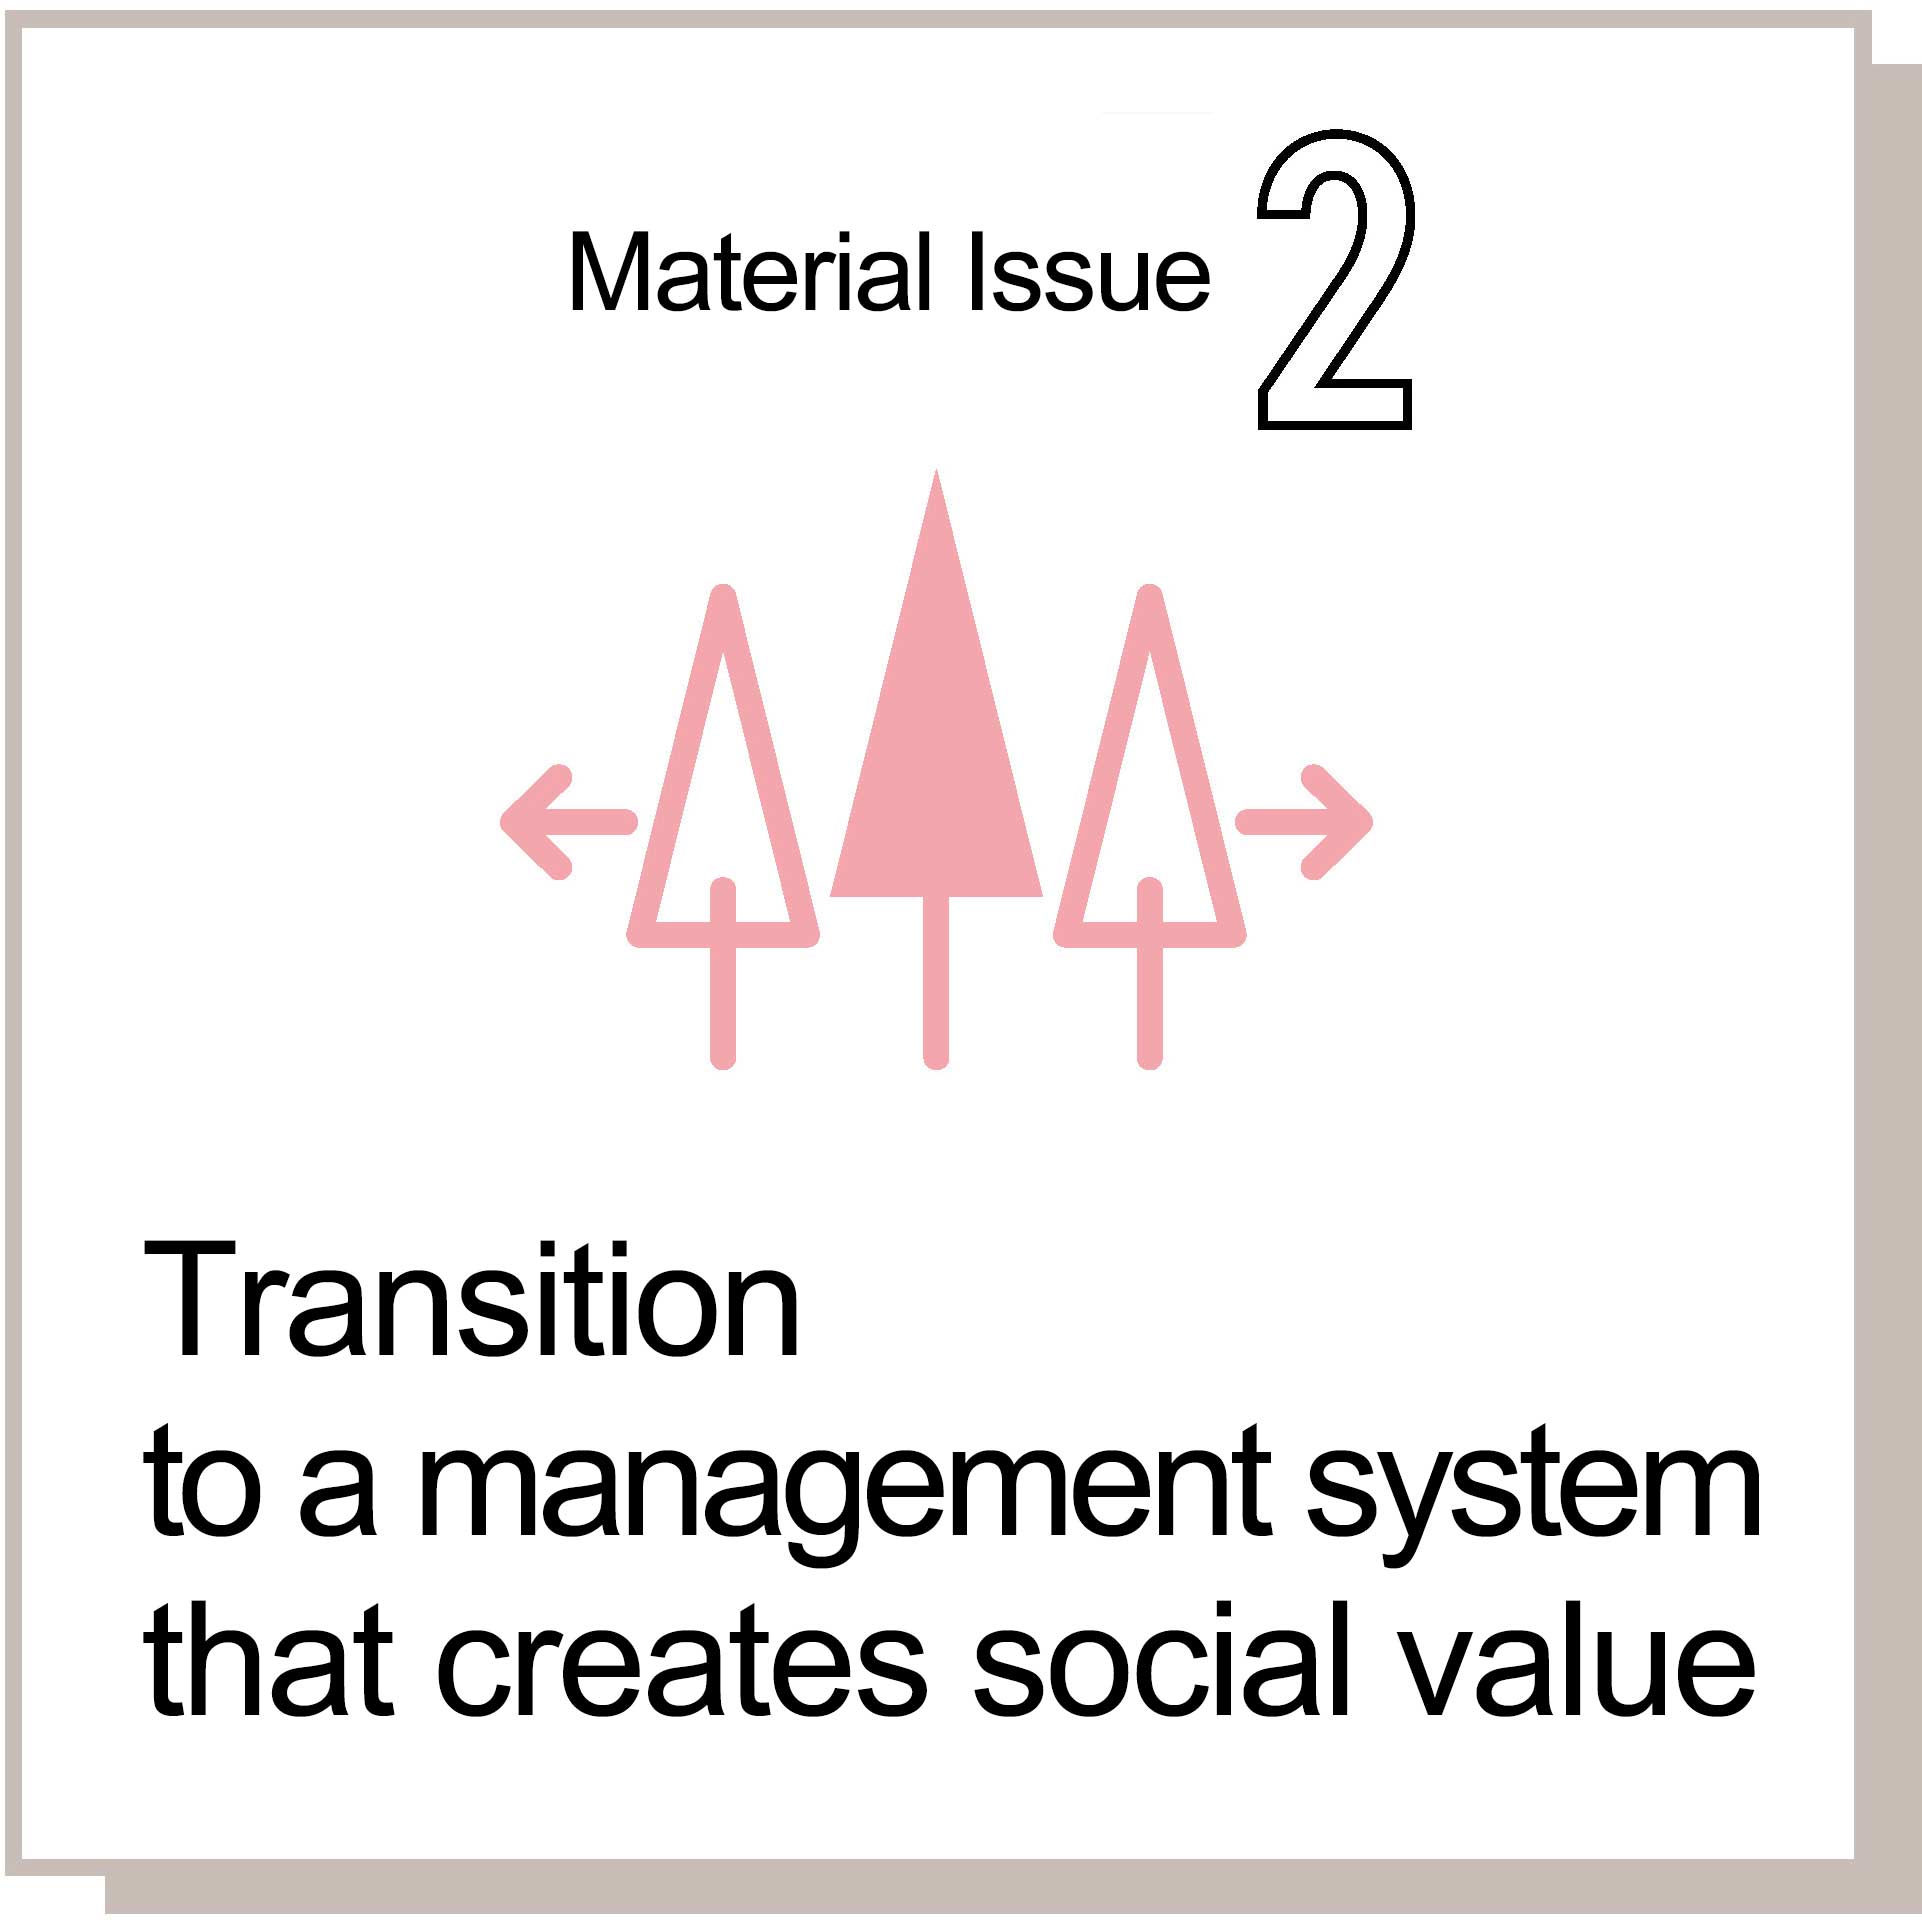 Material Issue 2 Transition to a management system that creates social value